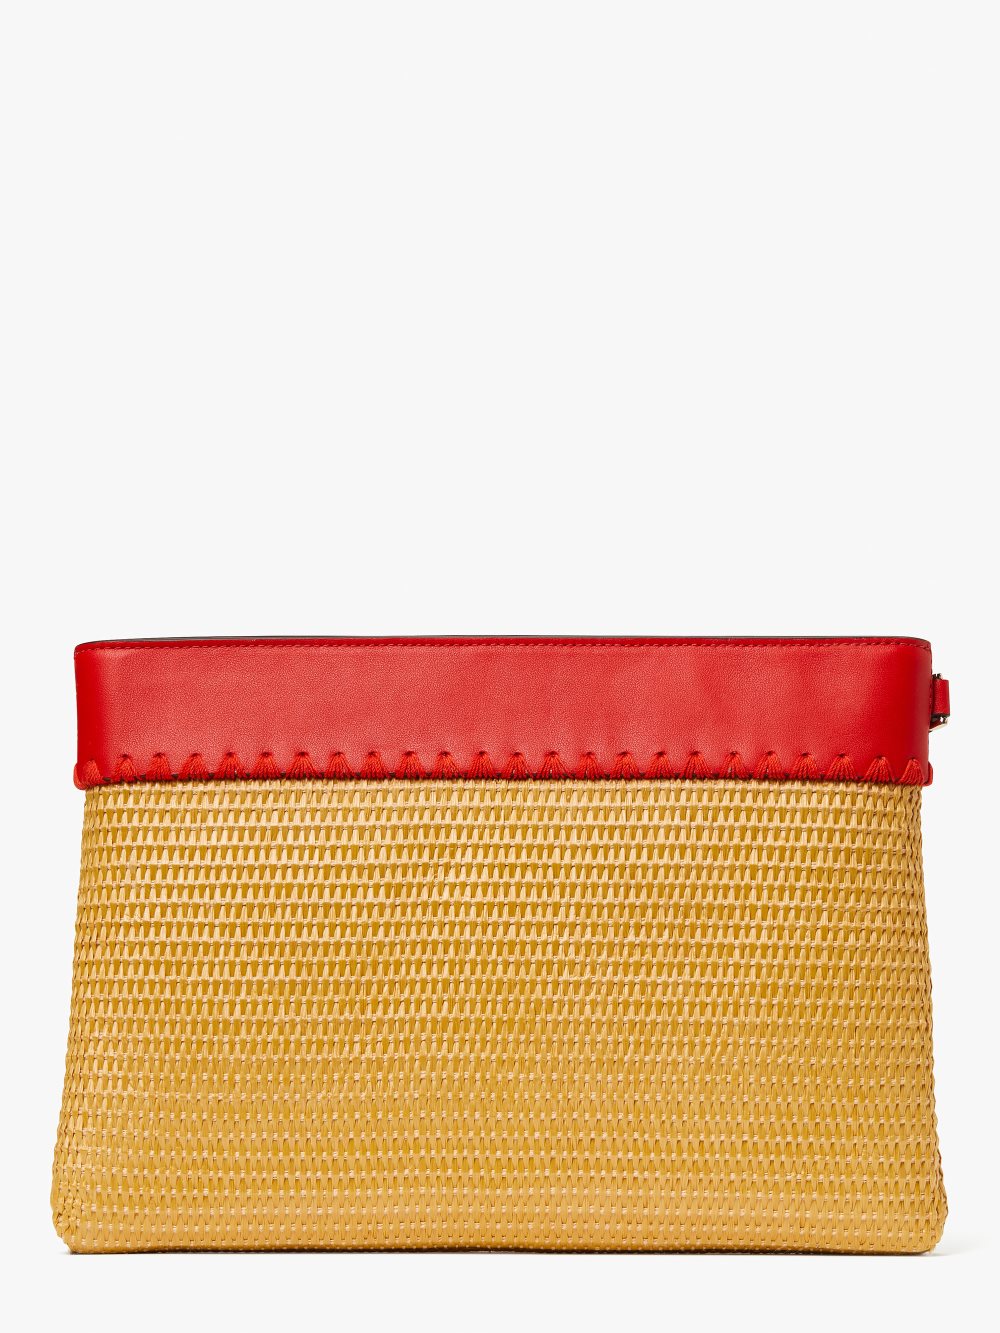 Women's natural multi Roma Embellished Tomato Straw Clutch | Kate Spade